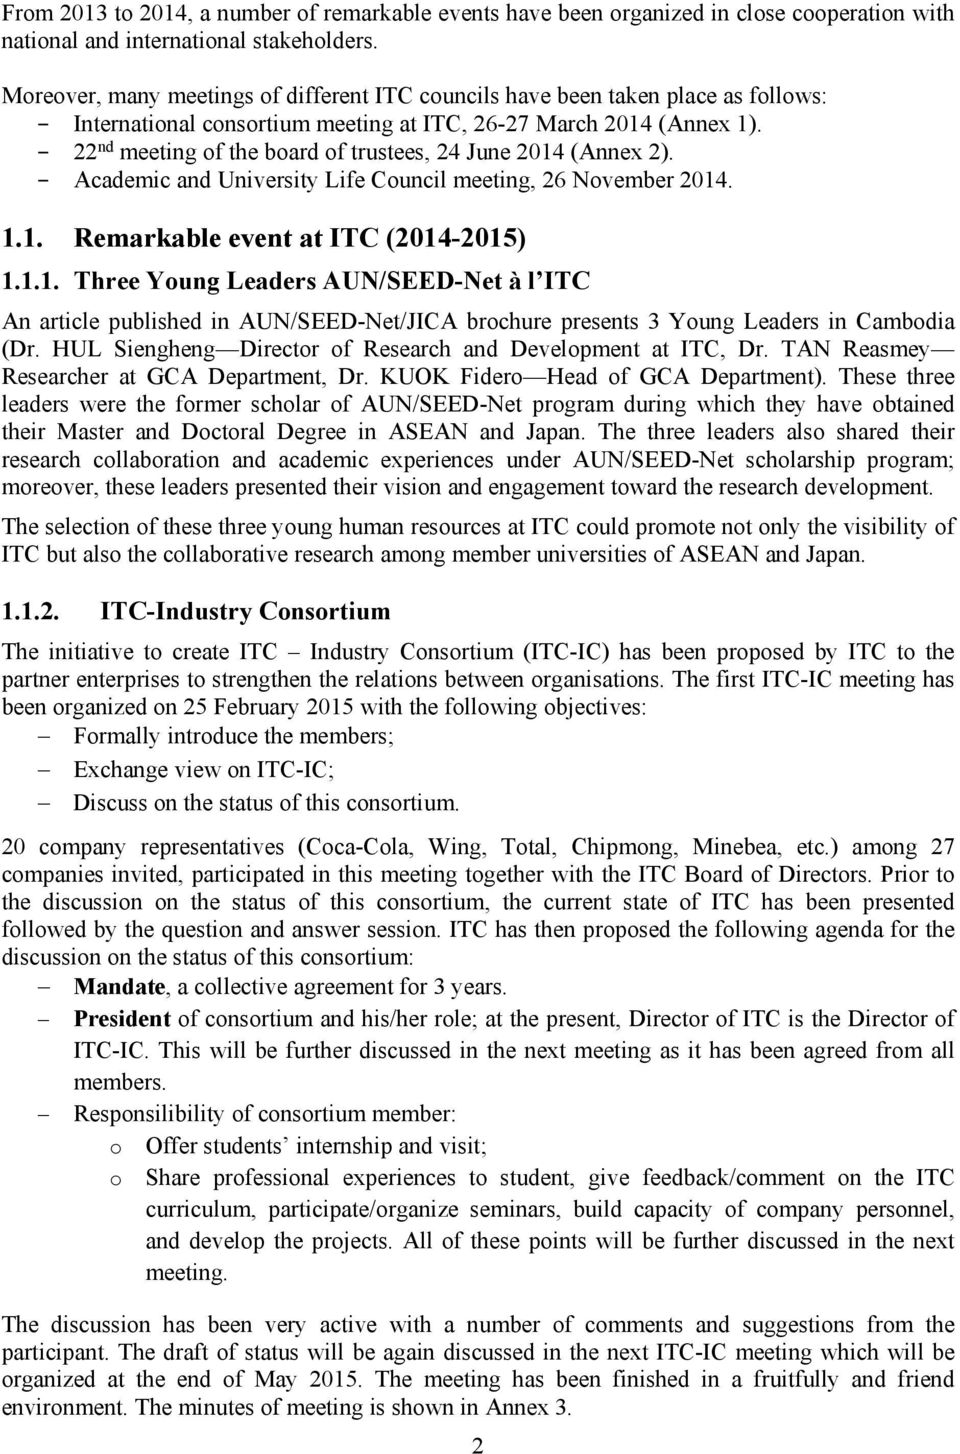 22 nd meeting of the board of trustees, 24 June 2014 (Annex 2). Academic and University Life Council meeting, 26 November 2014. 1.1. Remarkable event at ITC (2014-2015) 1.1.1. Three Young Leaders AUN/SEED-Net à l ITC An article published in AUN/SEED-Net/JICA brochure presents 3 Young Leaders in Cambodia (Dr.